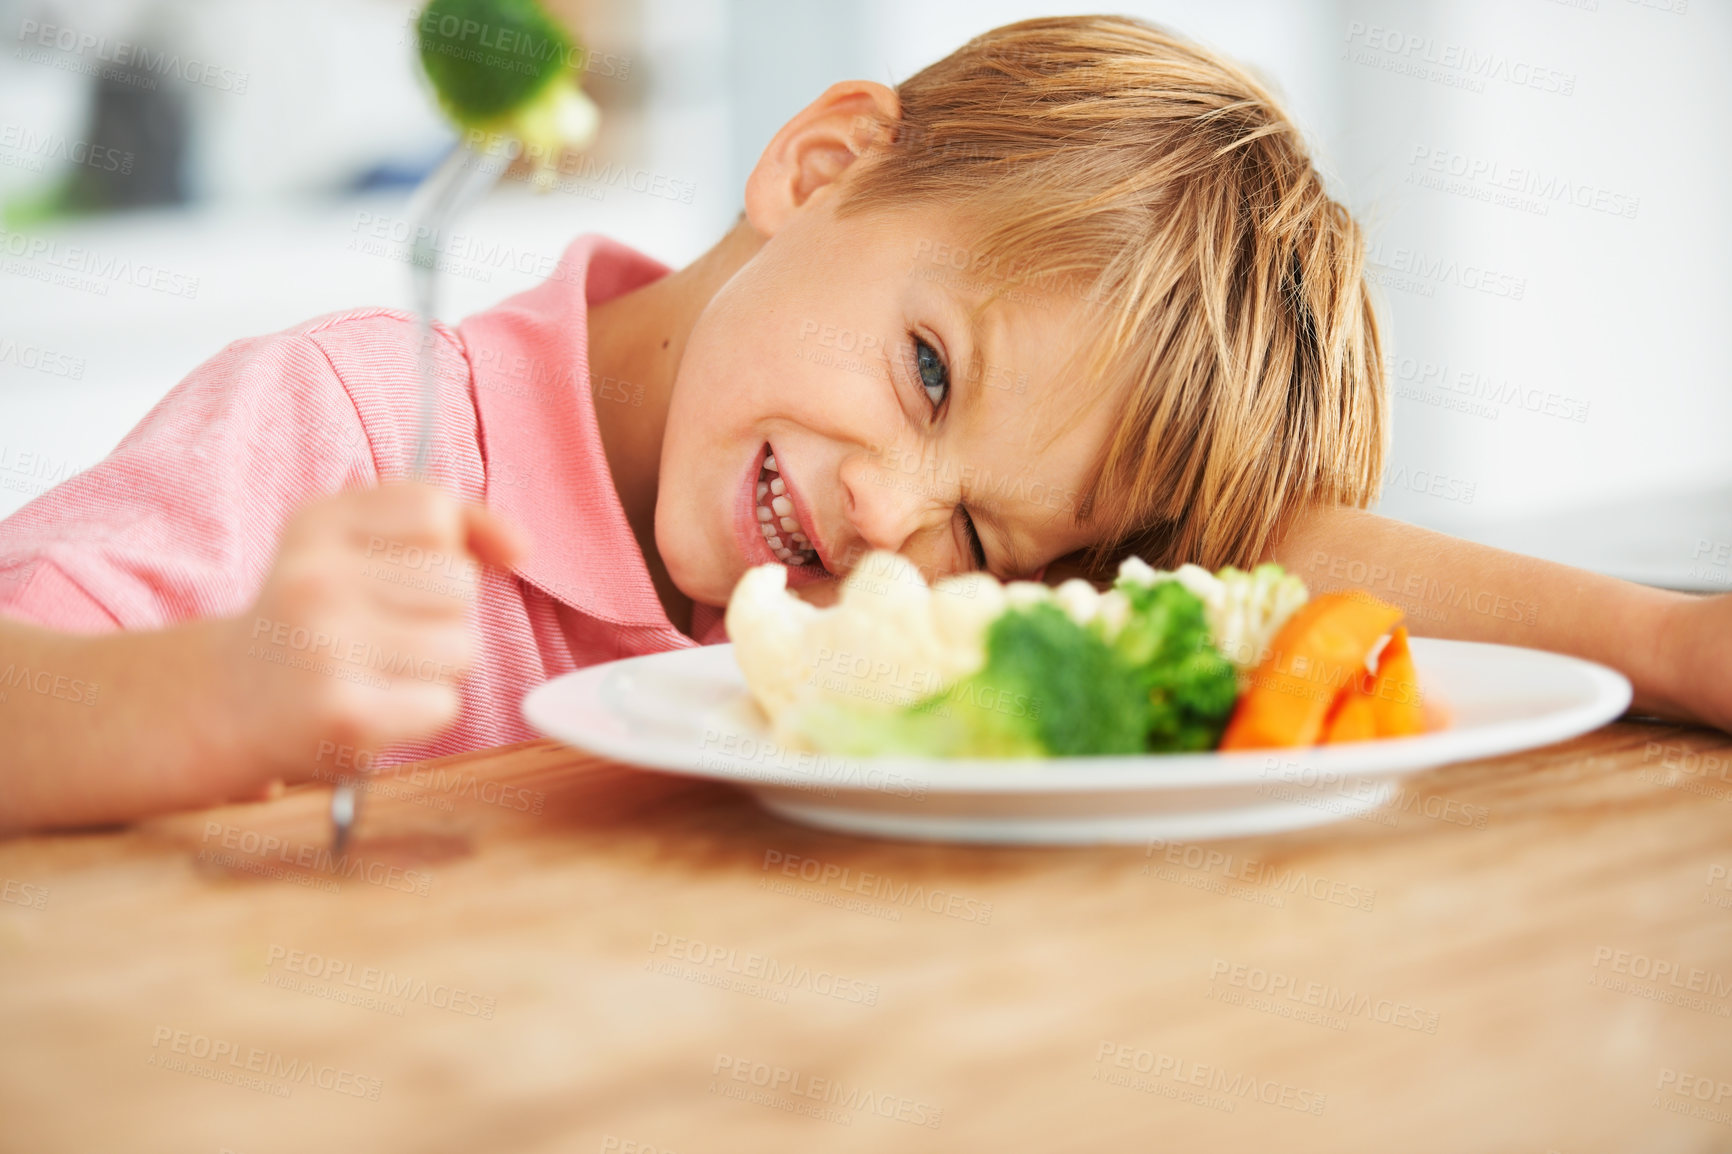 Buy stock photo Food, health and child eating vegetables for a healthy, growth and wellness diet at his home. Nutrition, dinner and boy kid laying on a dining table with produce lunch, snack or meal at his house.